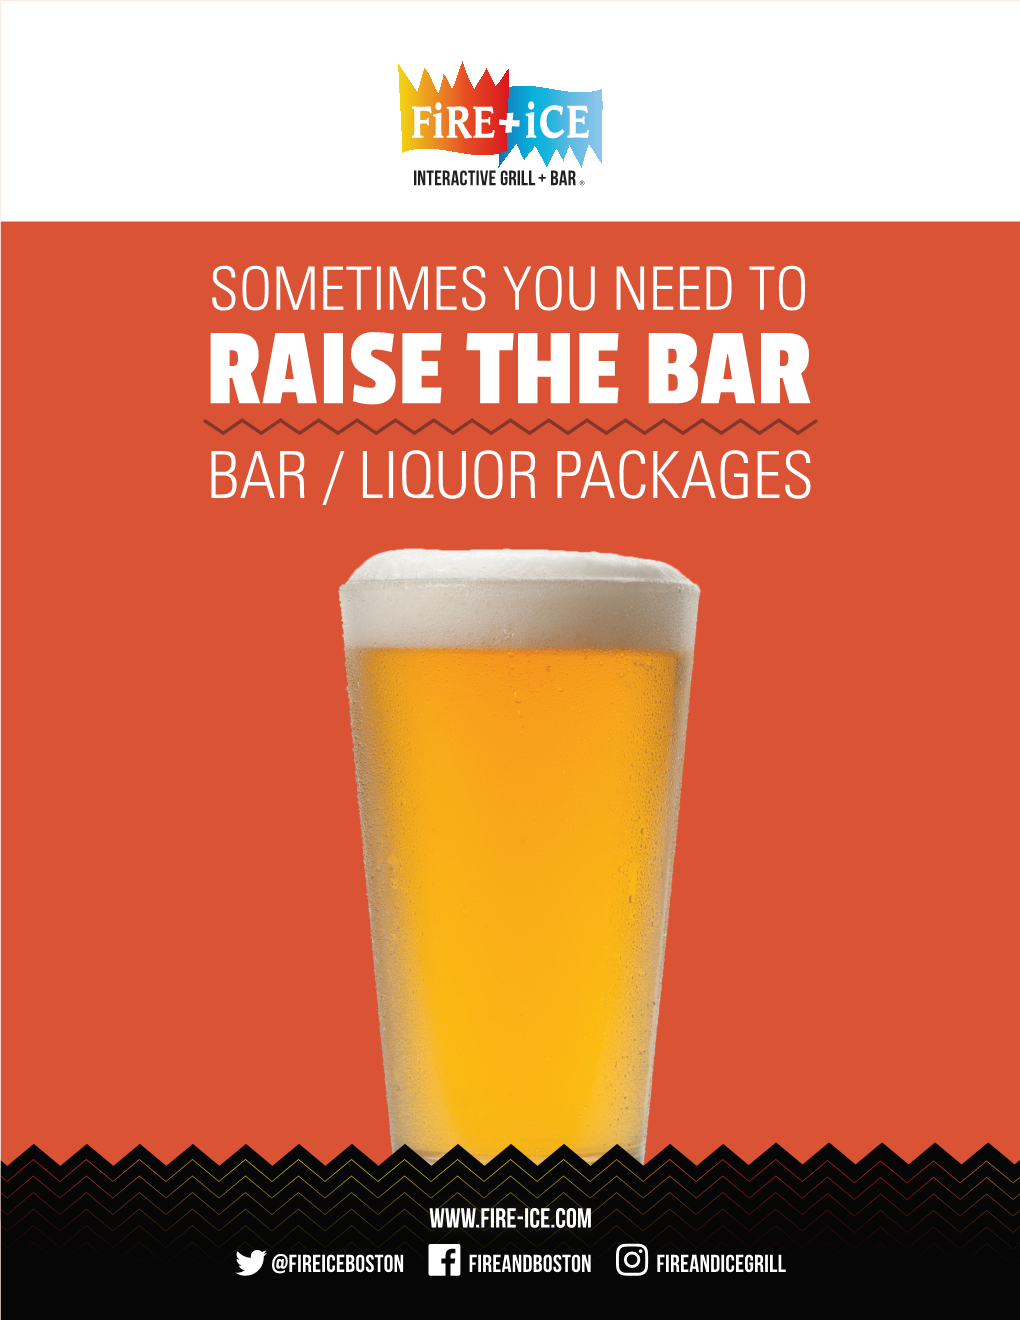 Download Liquor Packages